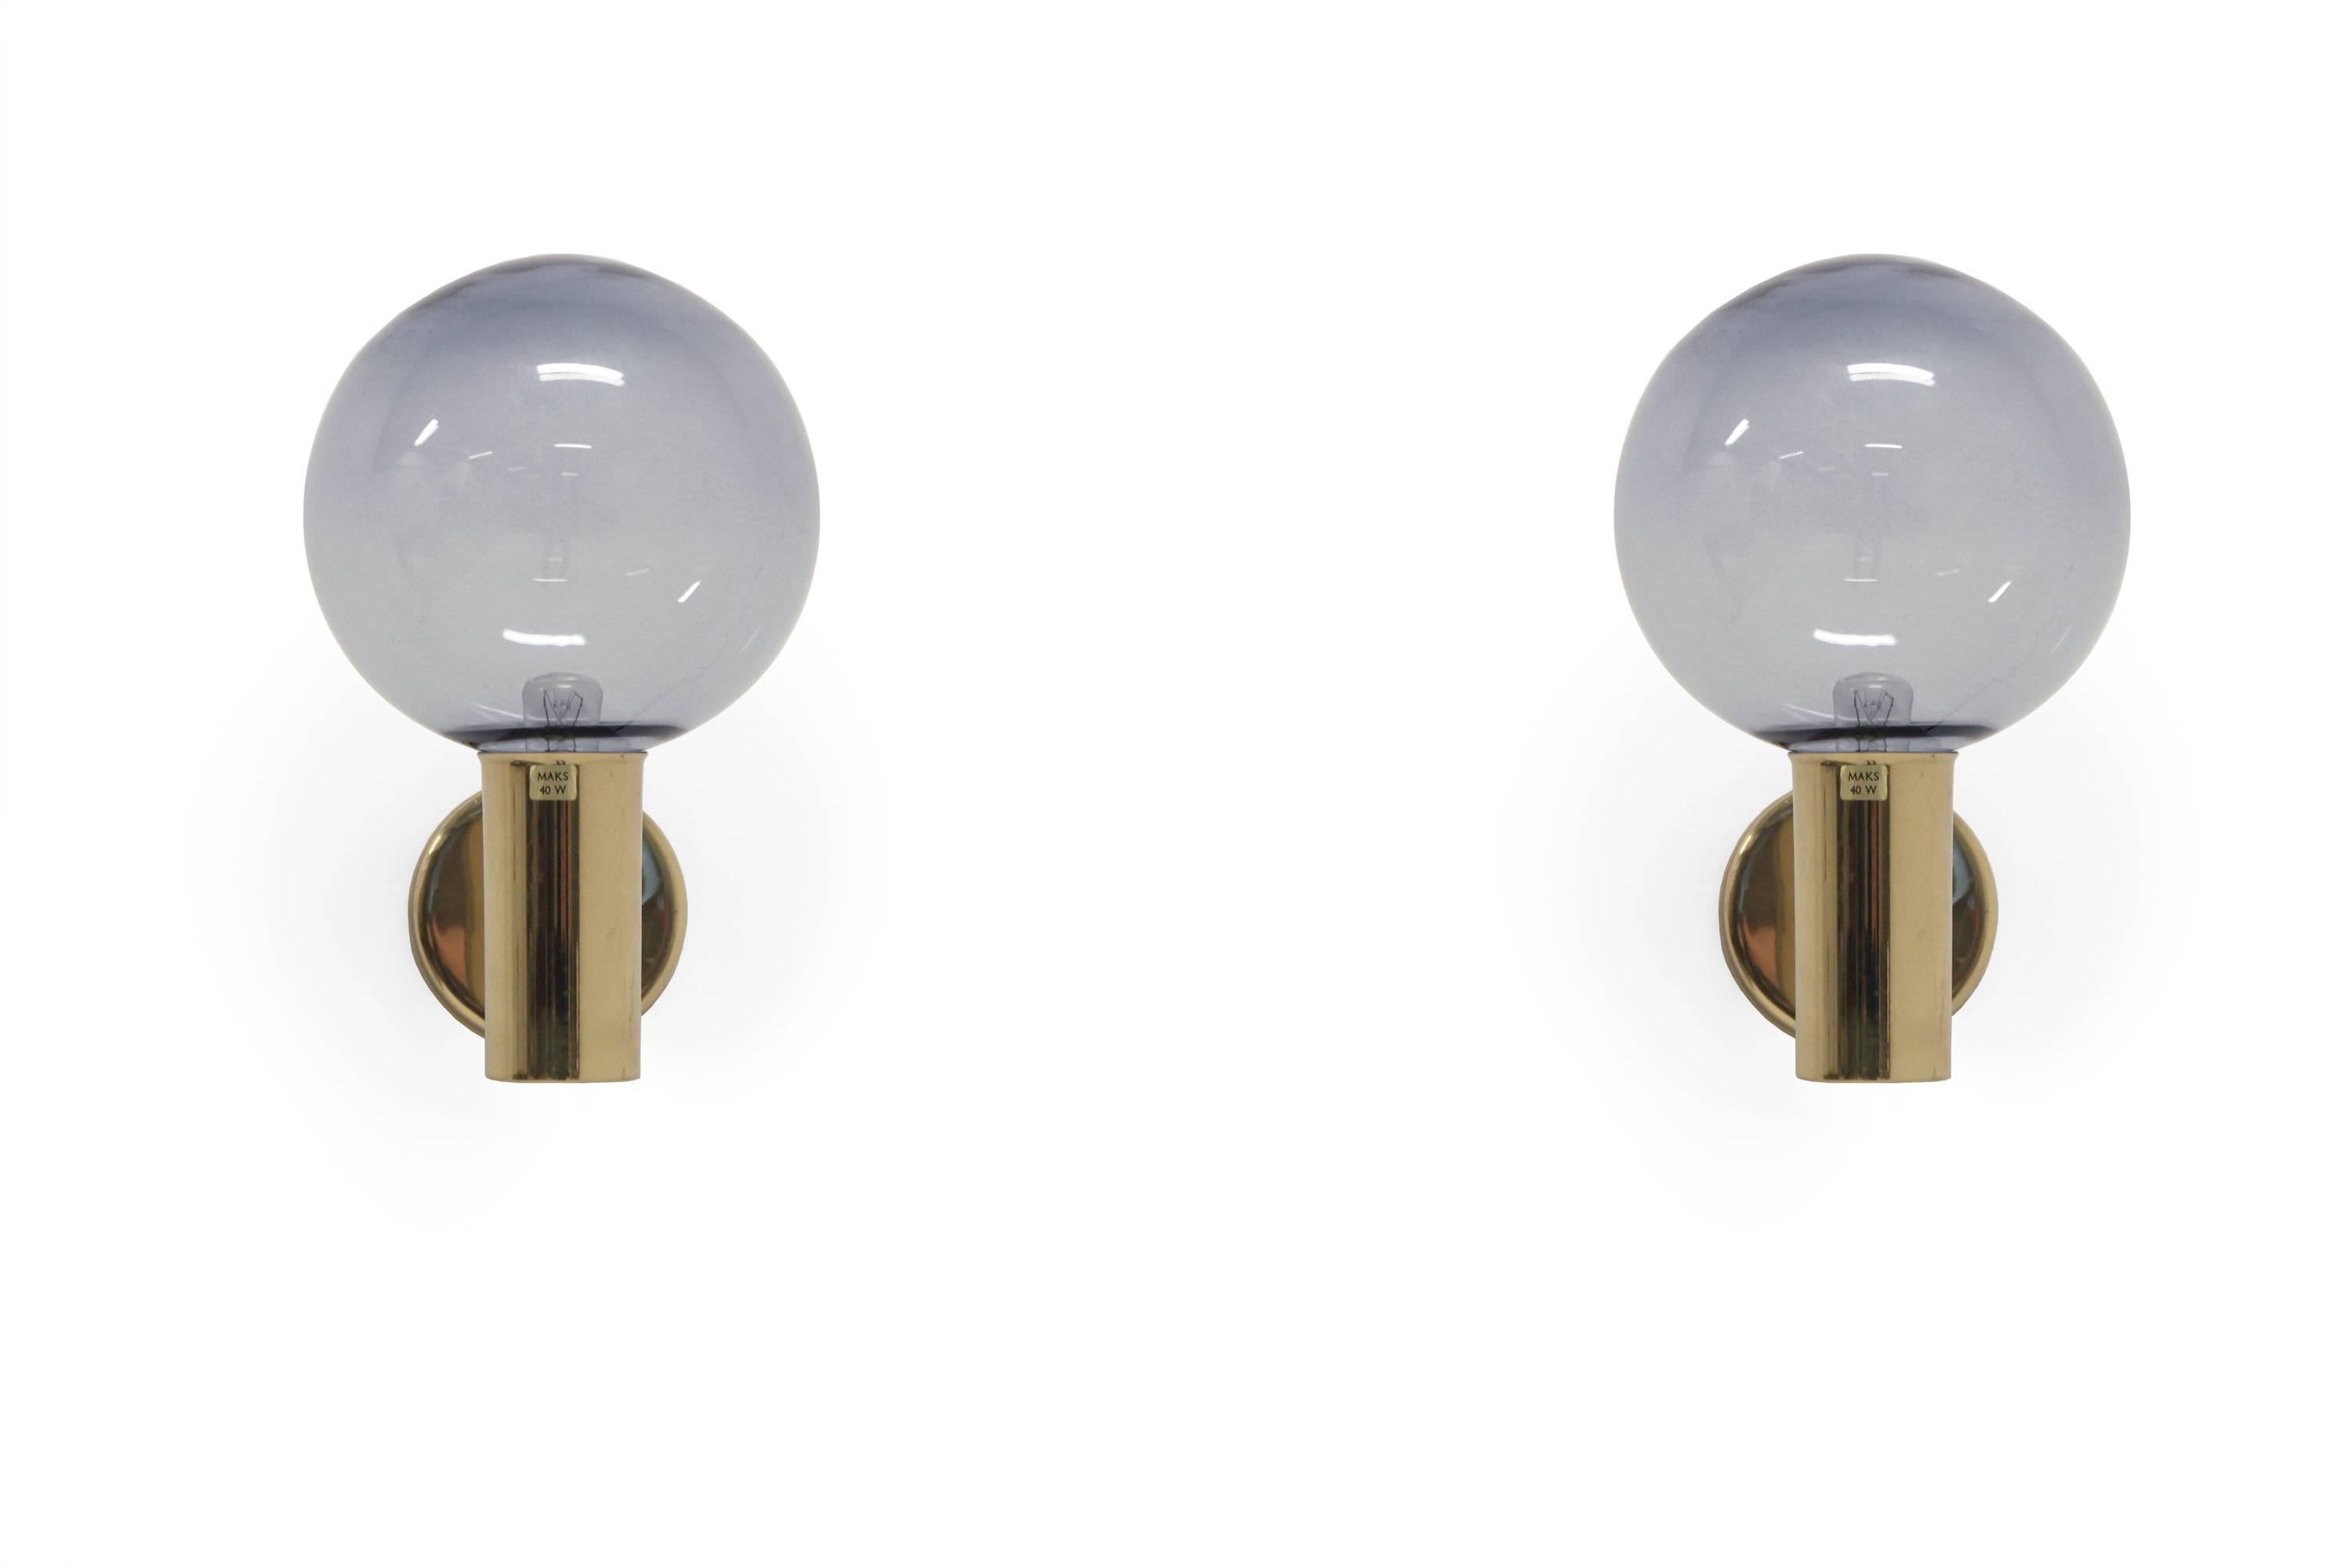 Beautiful pair of wall lights in brass and shades in glass with a blue tone.

This is model V-149. Designed by Hans Agne Jakobsson and made in Norway on license by Arnold Wiigs Fabrikker, from circa 1960s second half.

Both lamps are fully